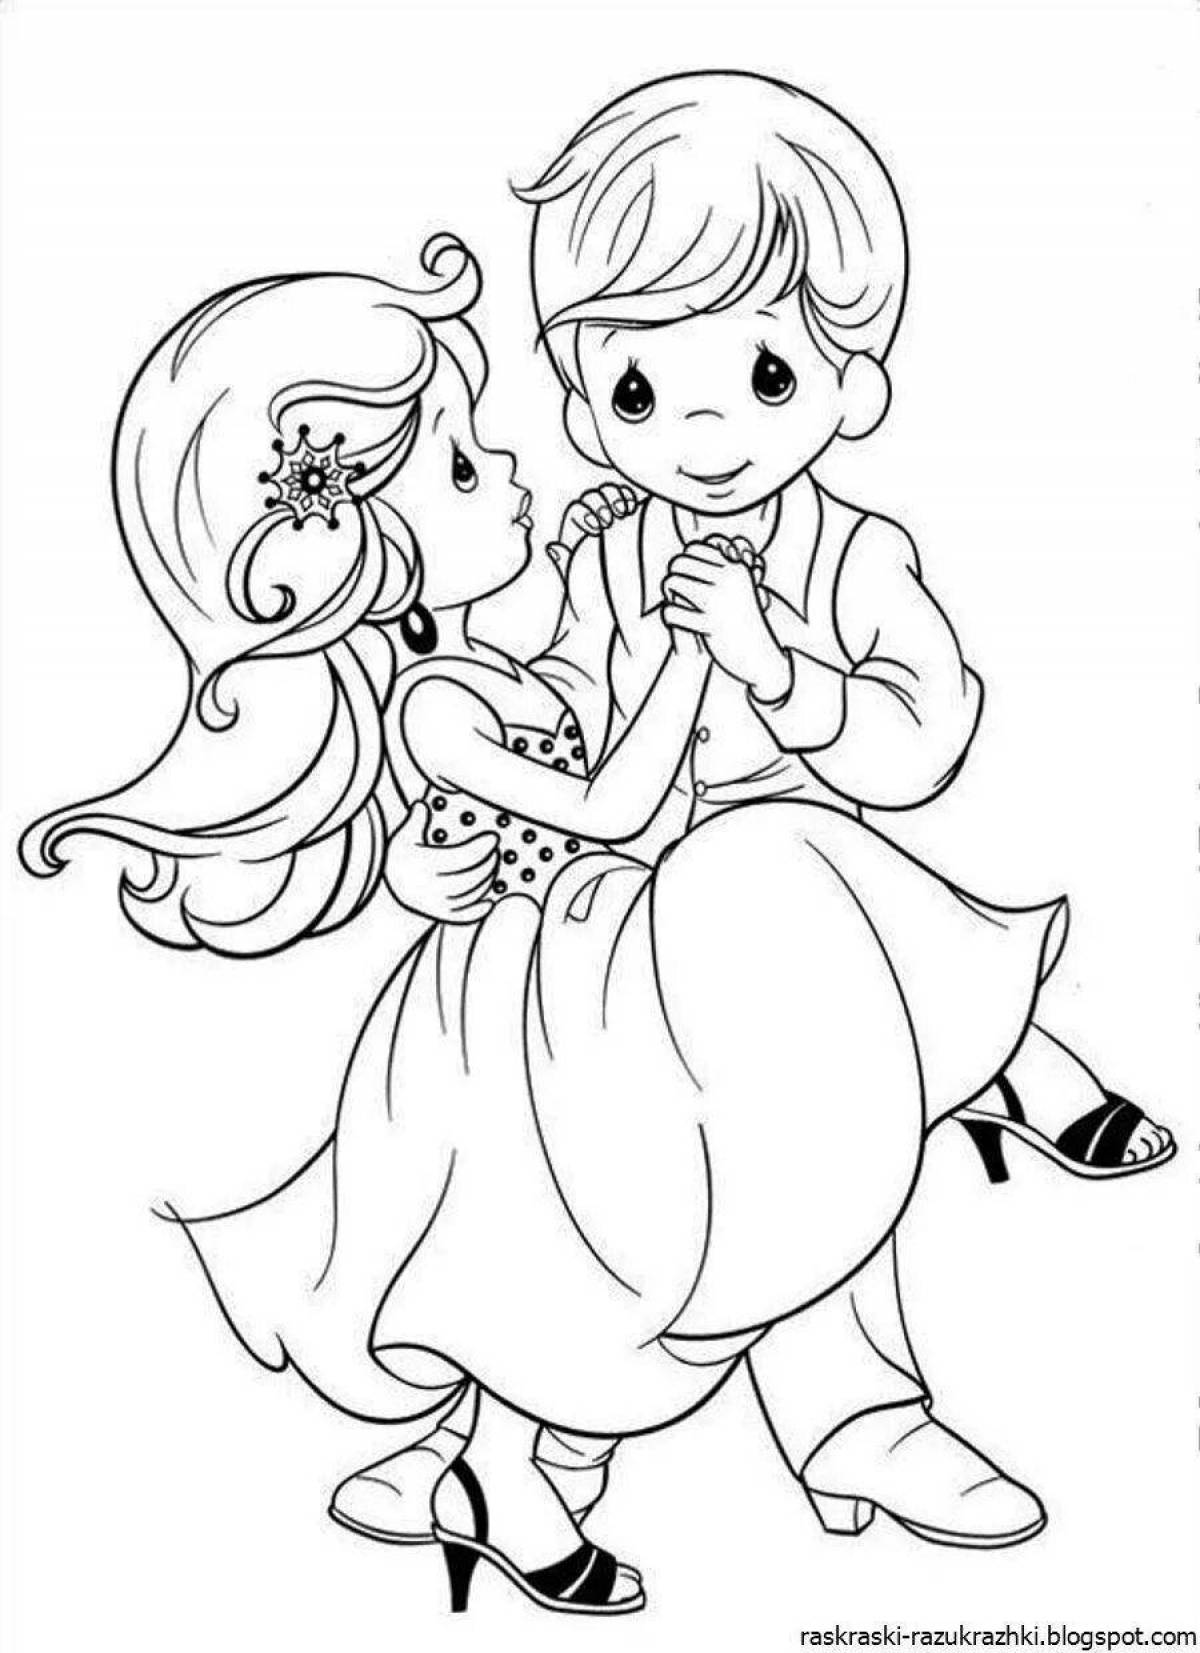 Glorious coloring book for girls 5-6 years old